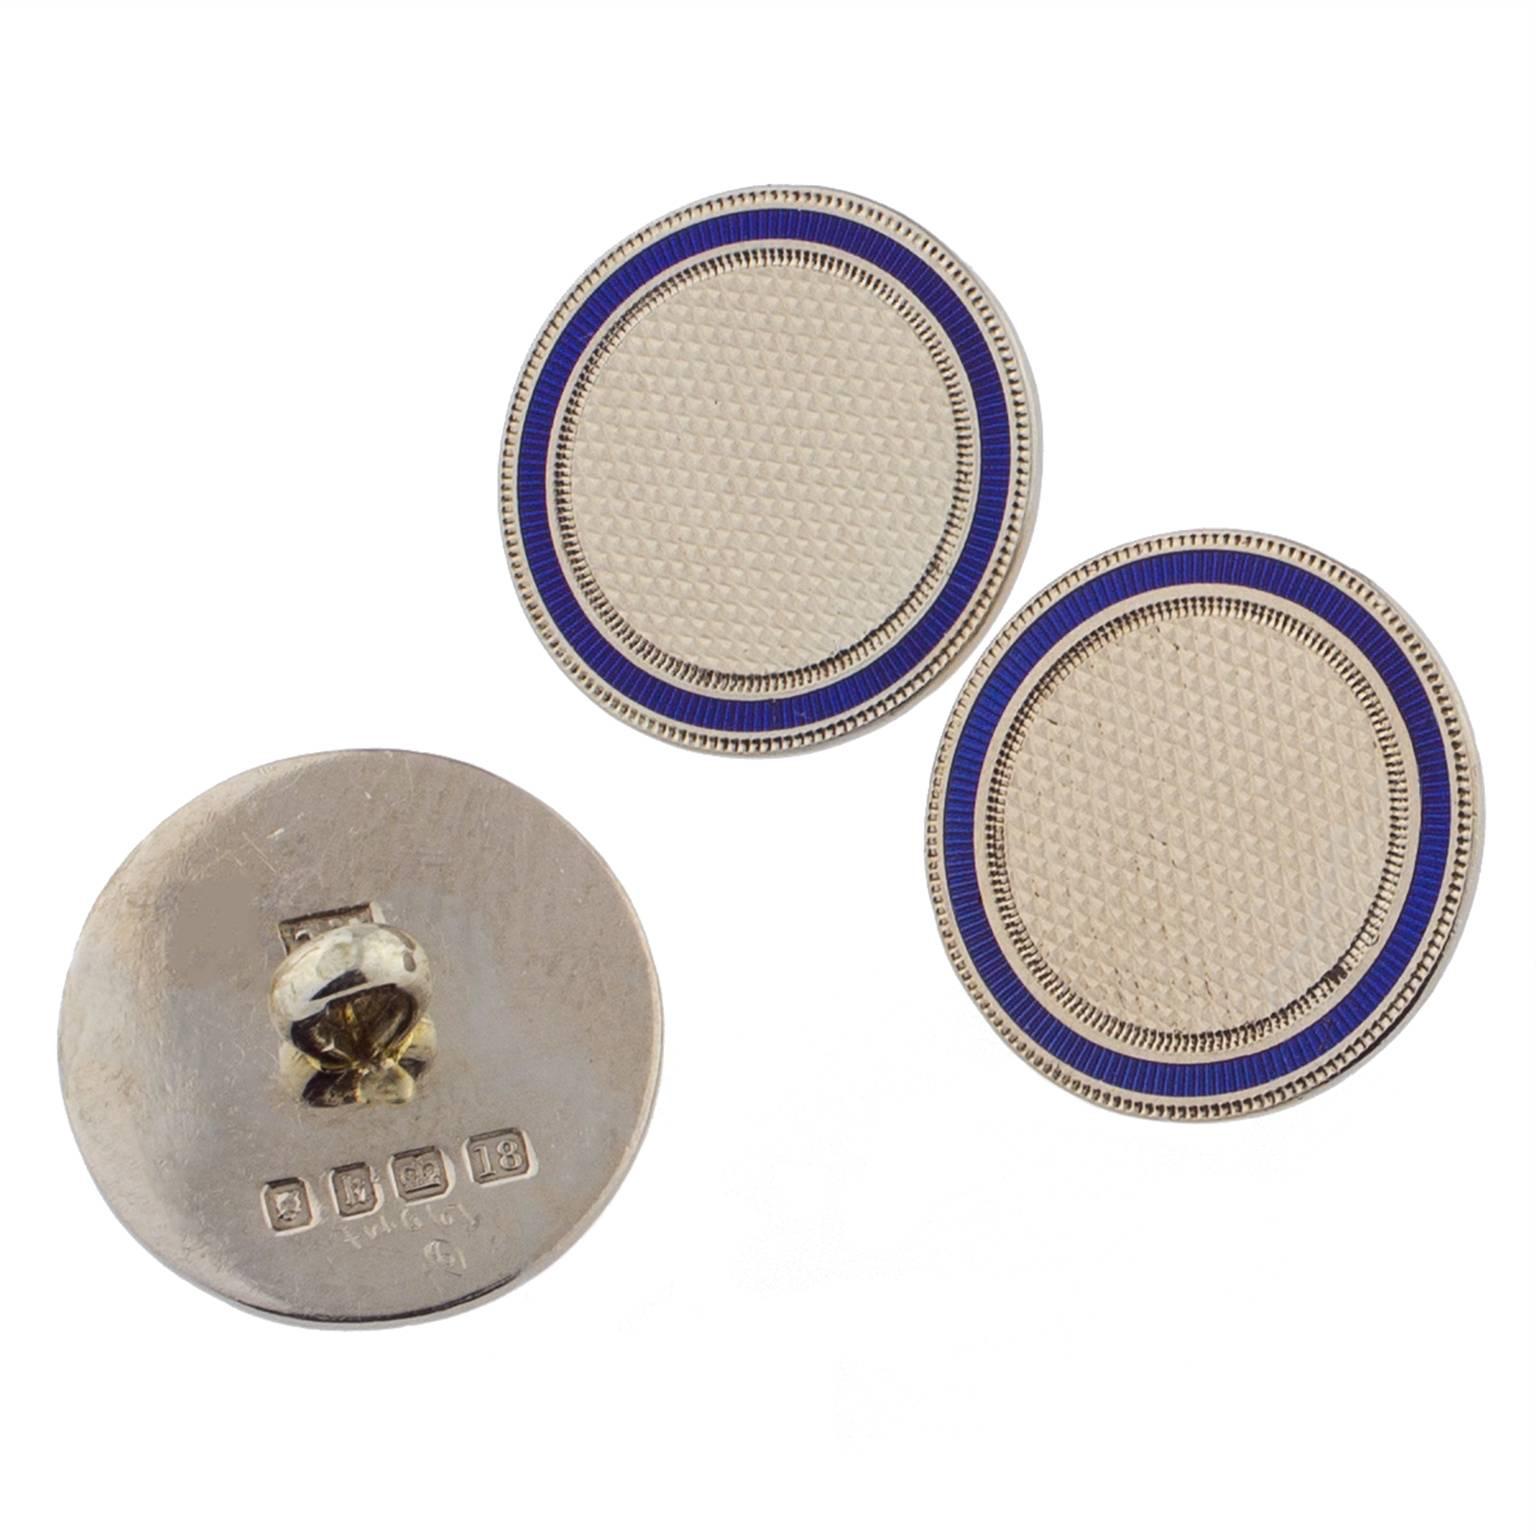 English set of Art Deco buttons in white gold and blue enamel, from London 1925, signed by FC.
Big diameter: 15mm (0.59 in)
Small diamater: 7mm (0.28 in)